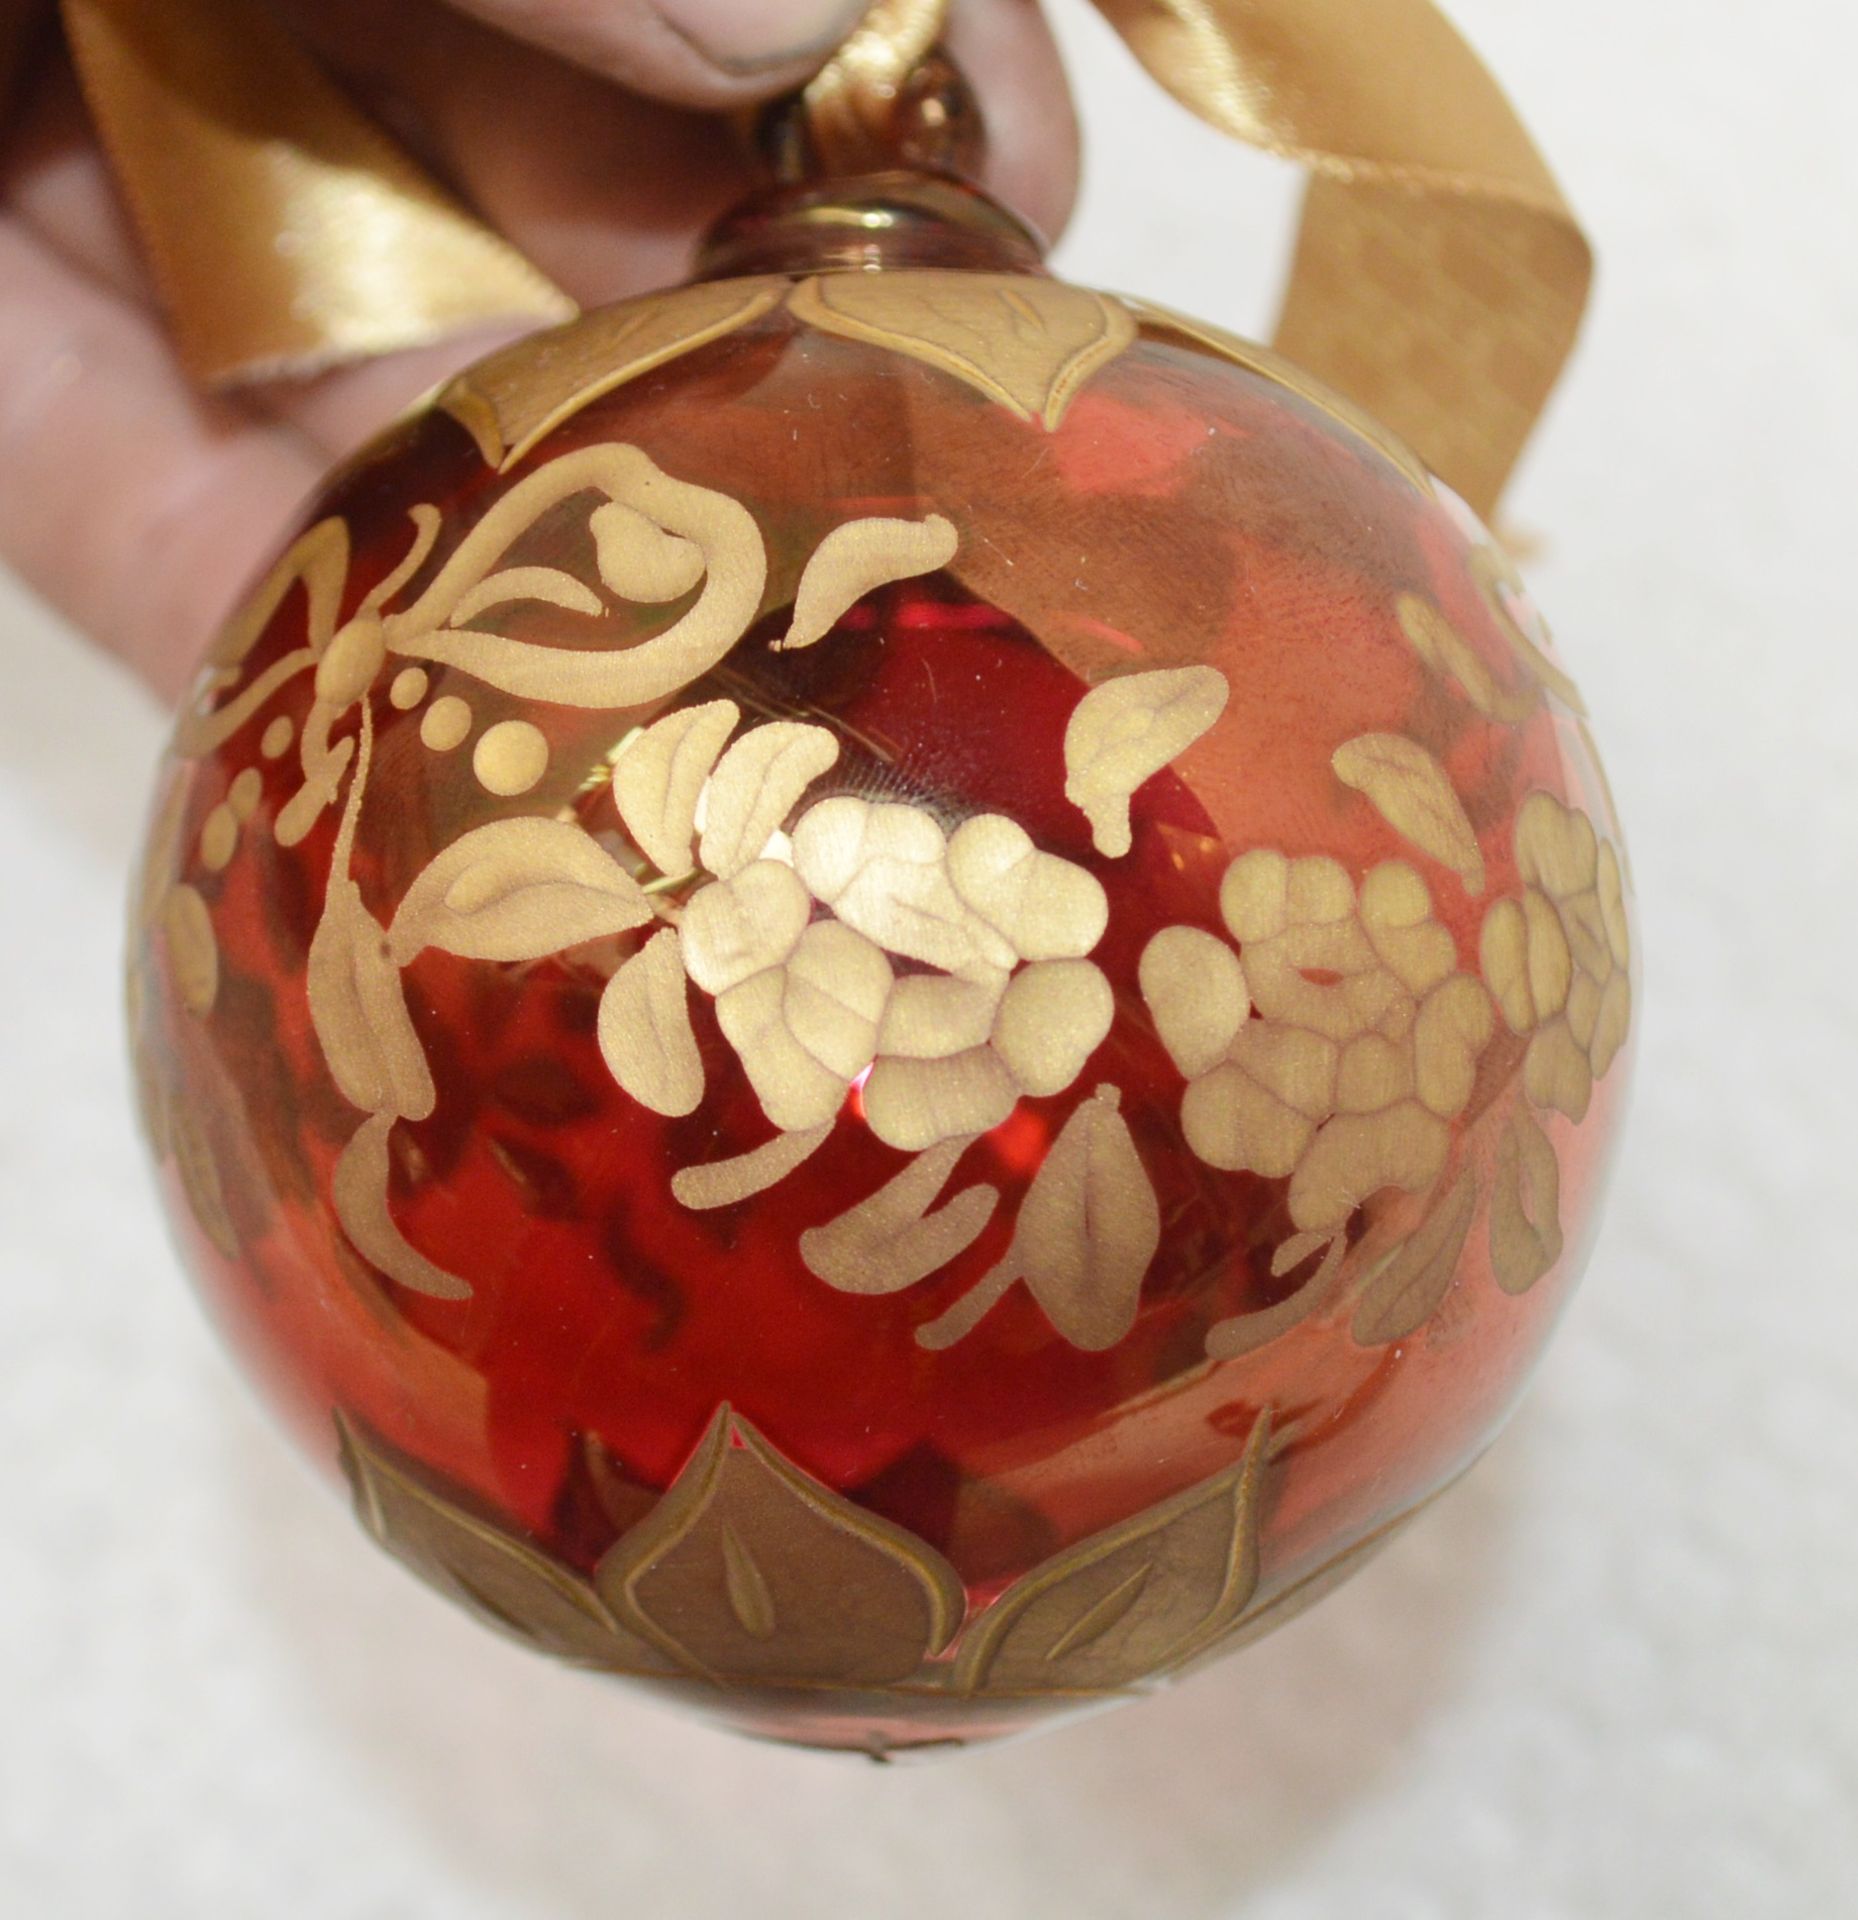 1 x BALDI 'Home Jewels' Italian Hand-crafted Artisan Glass Christmas Tree Decoration In Red and Gold - Image 3 of 4